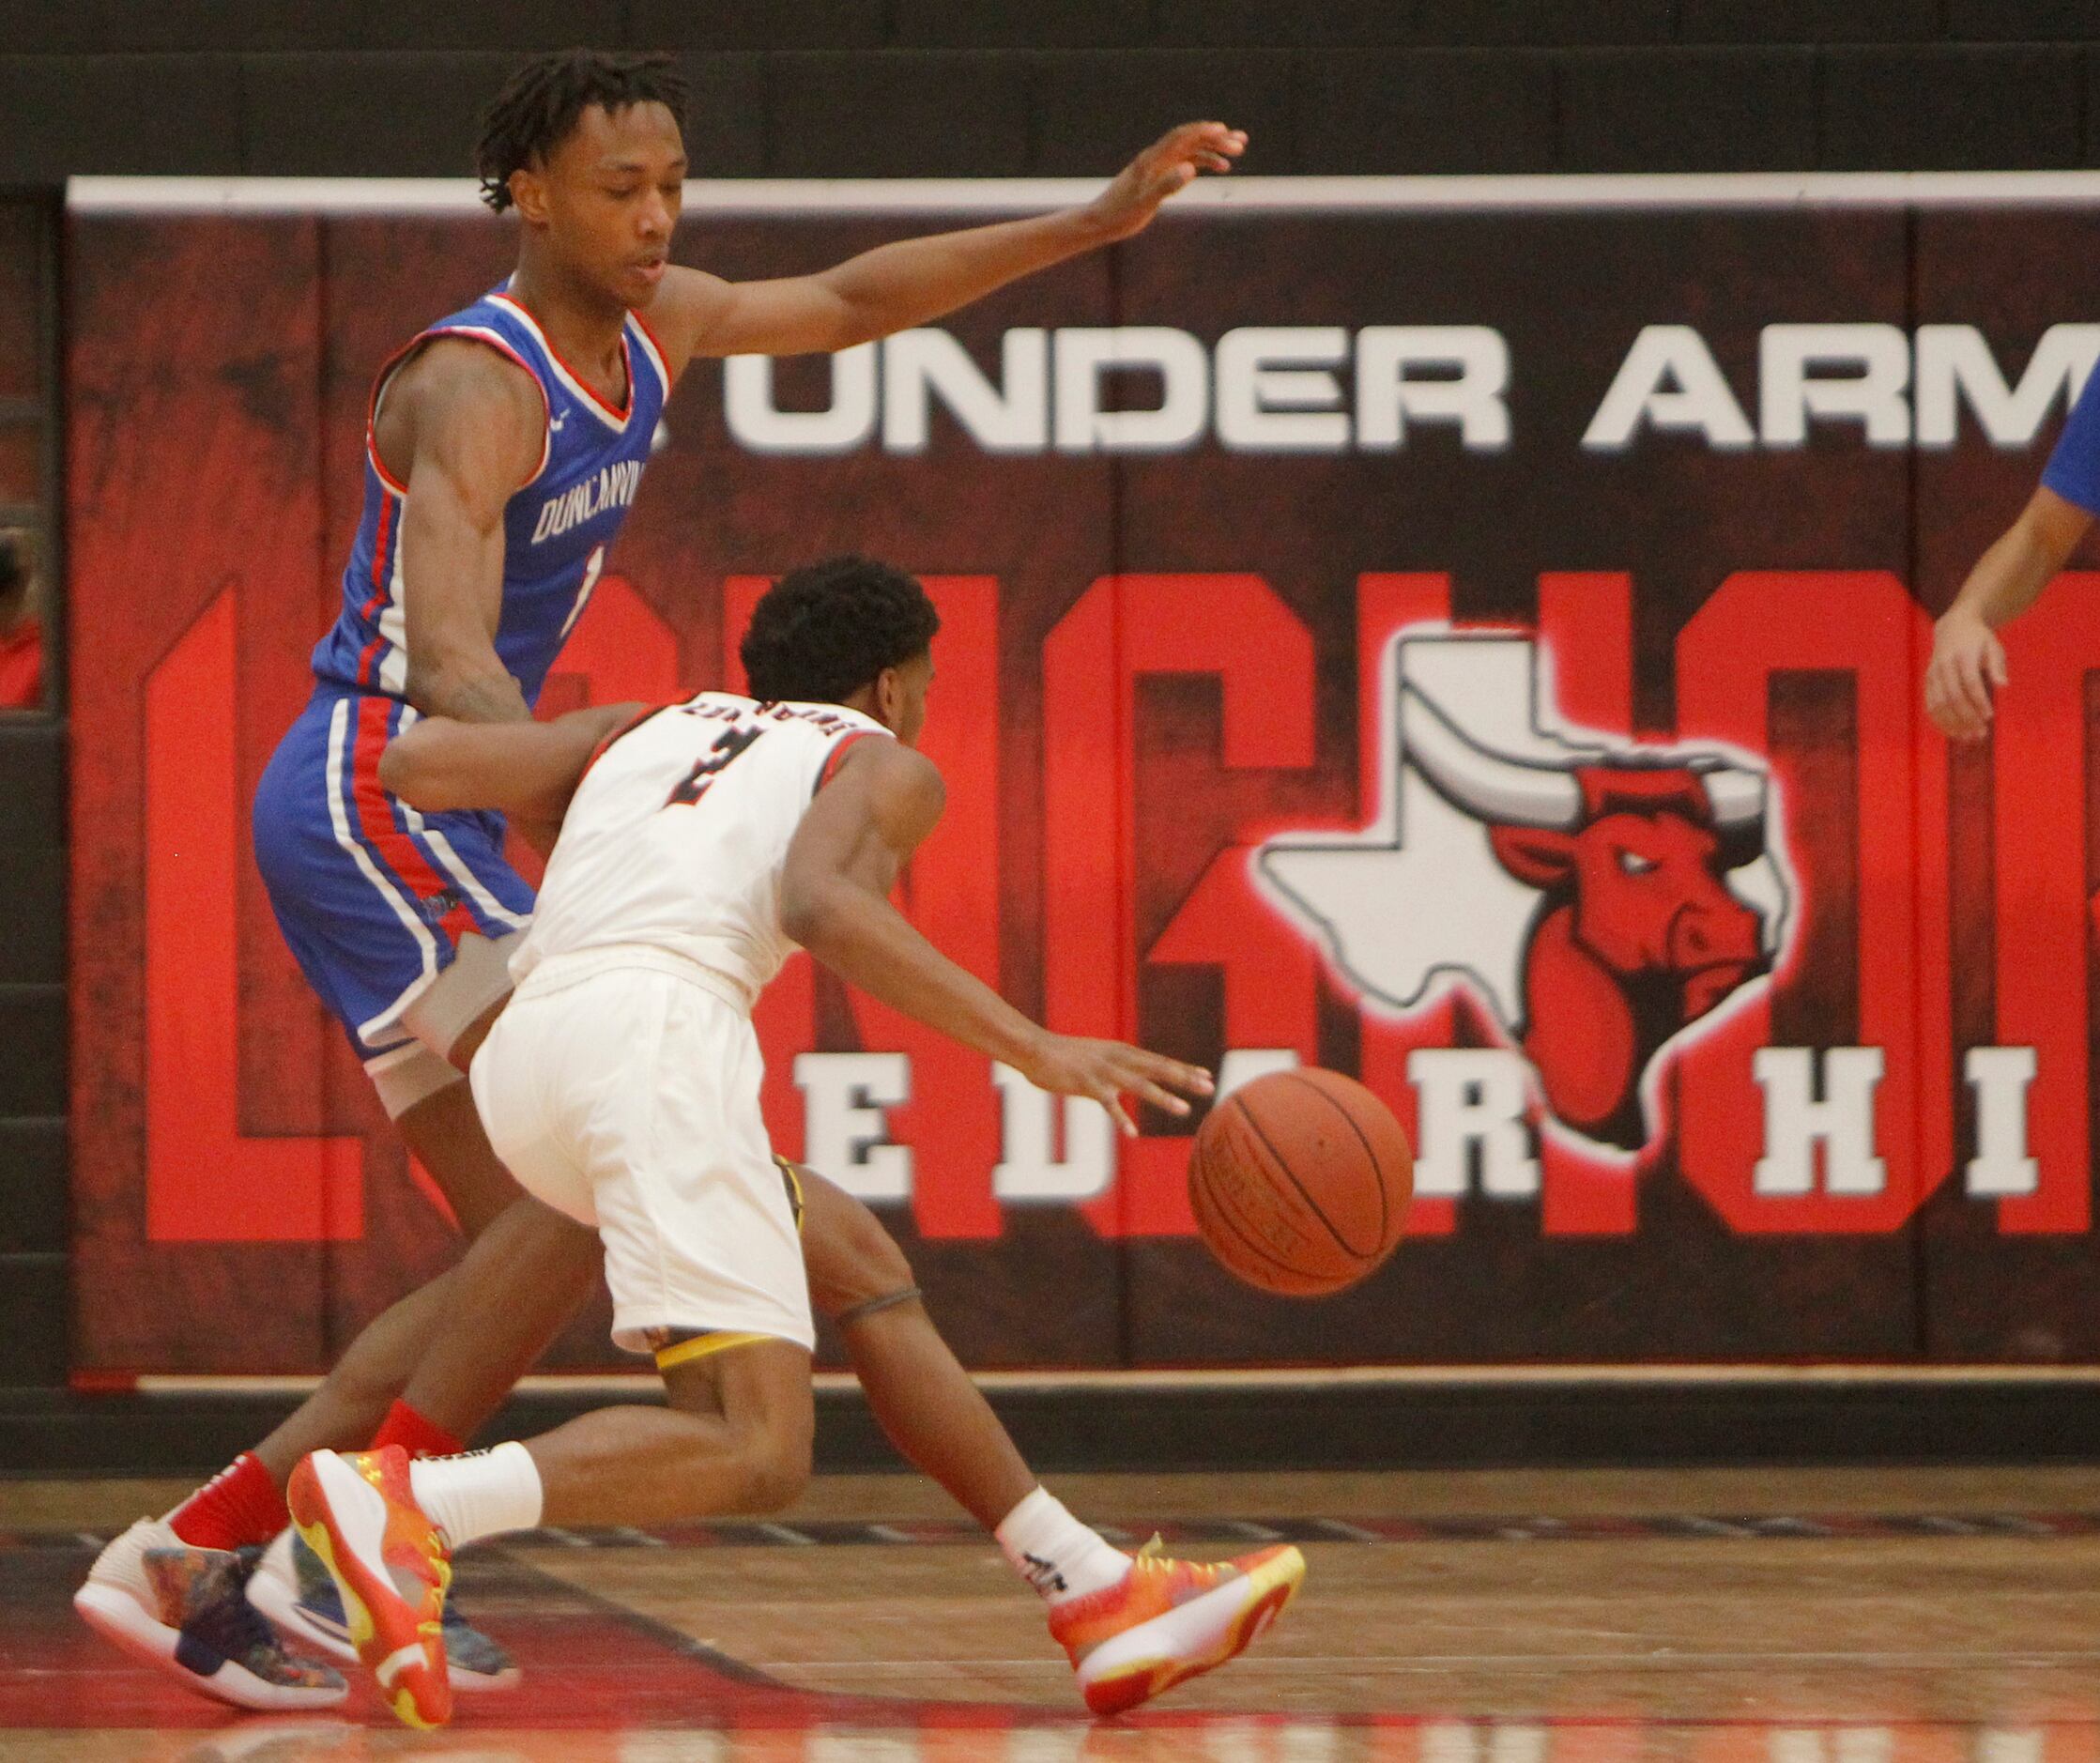 As a banner message suggests in the background, Cedar Hill's Jason Justice (2) dribbles...